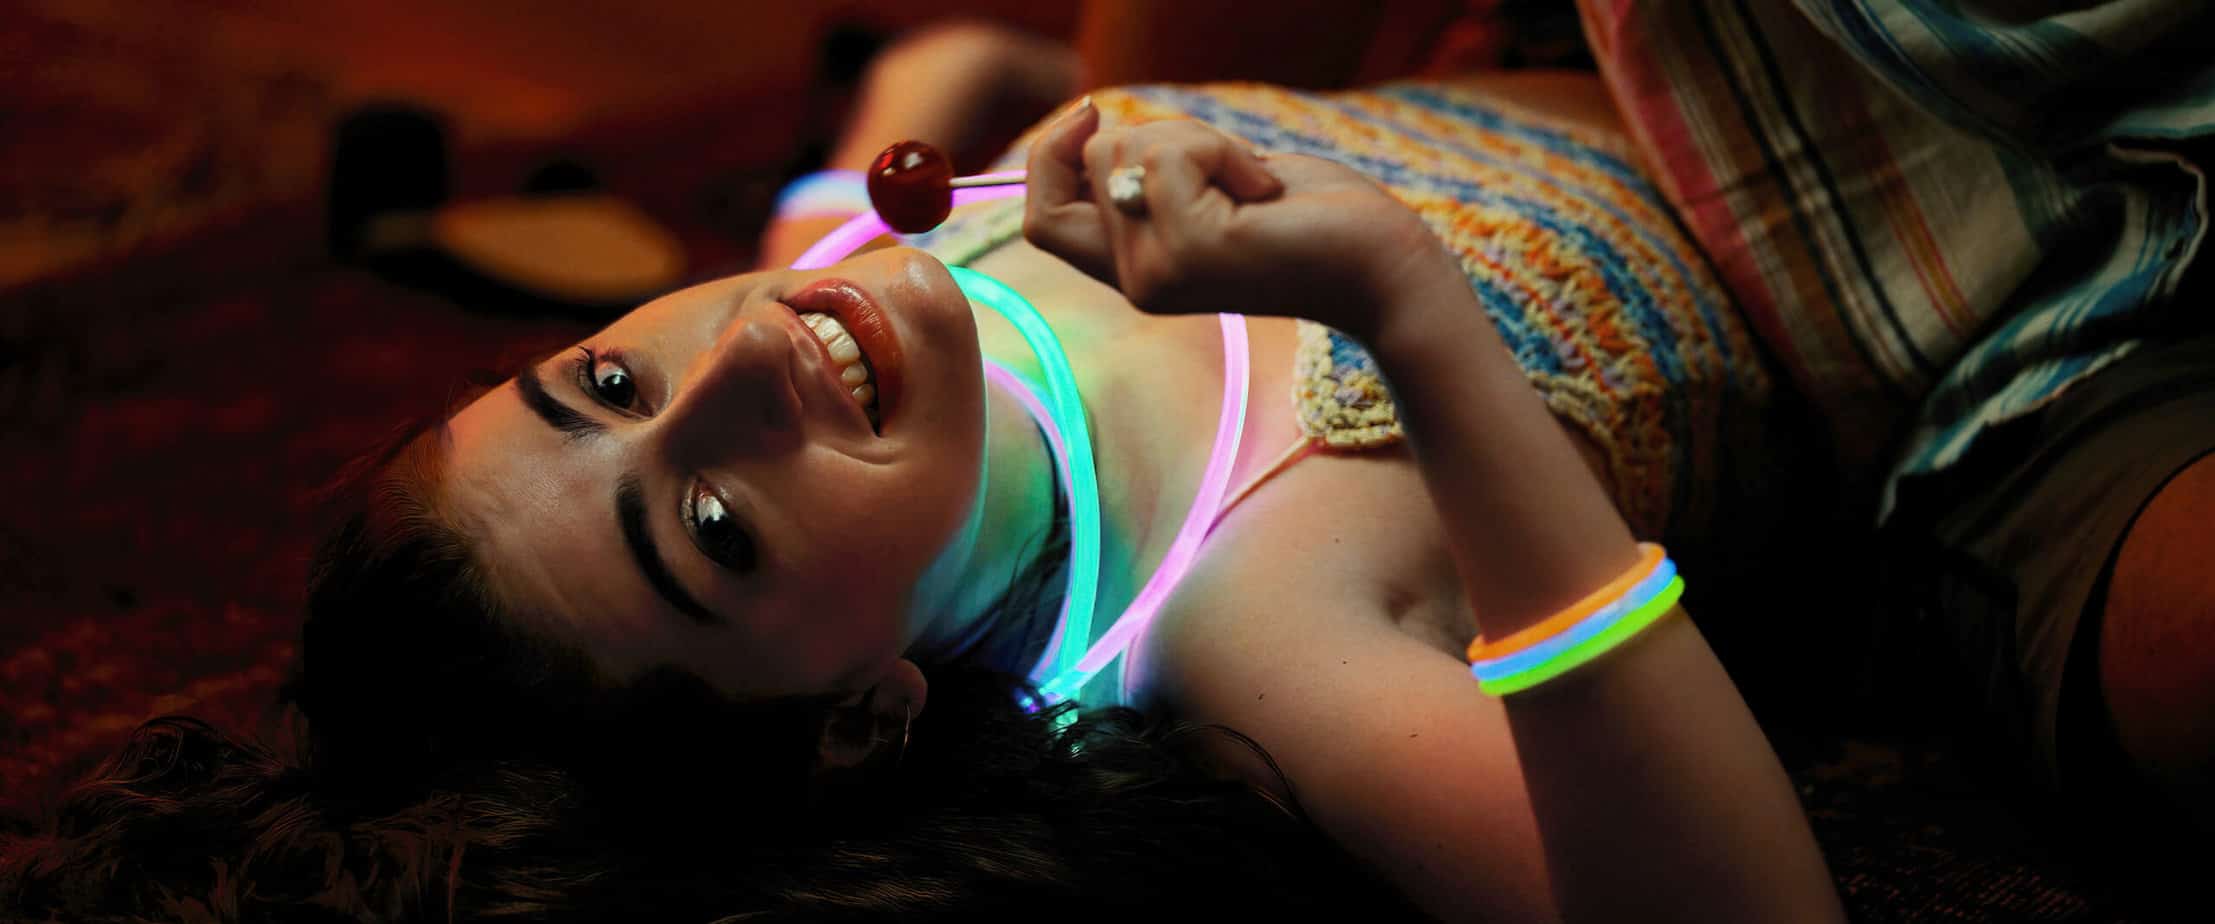 Age Rating for Bodies Bodies Bodies parents guide. Girl laying on her back looking at the camera with glow necklaces around her neck. She is holding a blow pop lollipop.